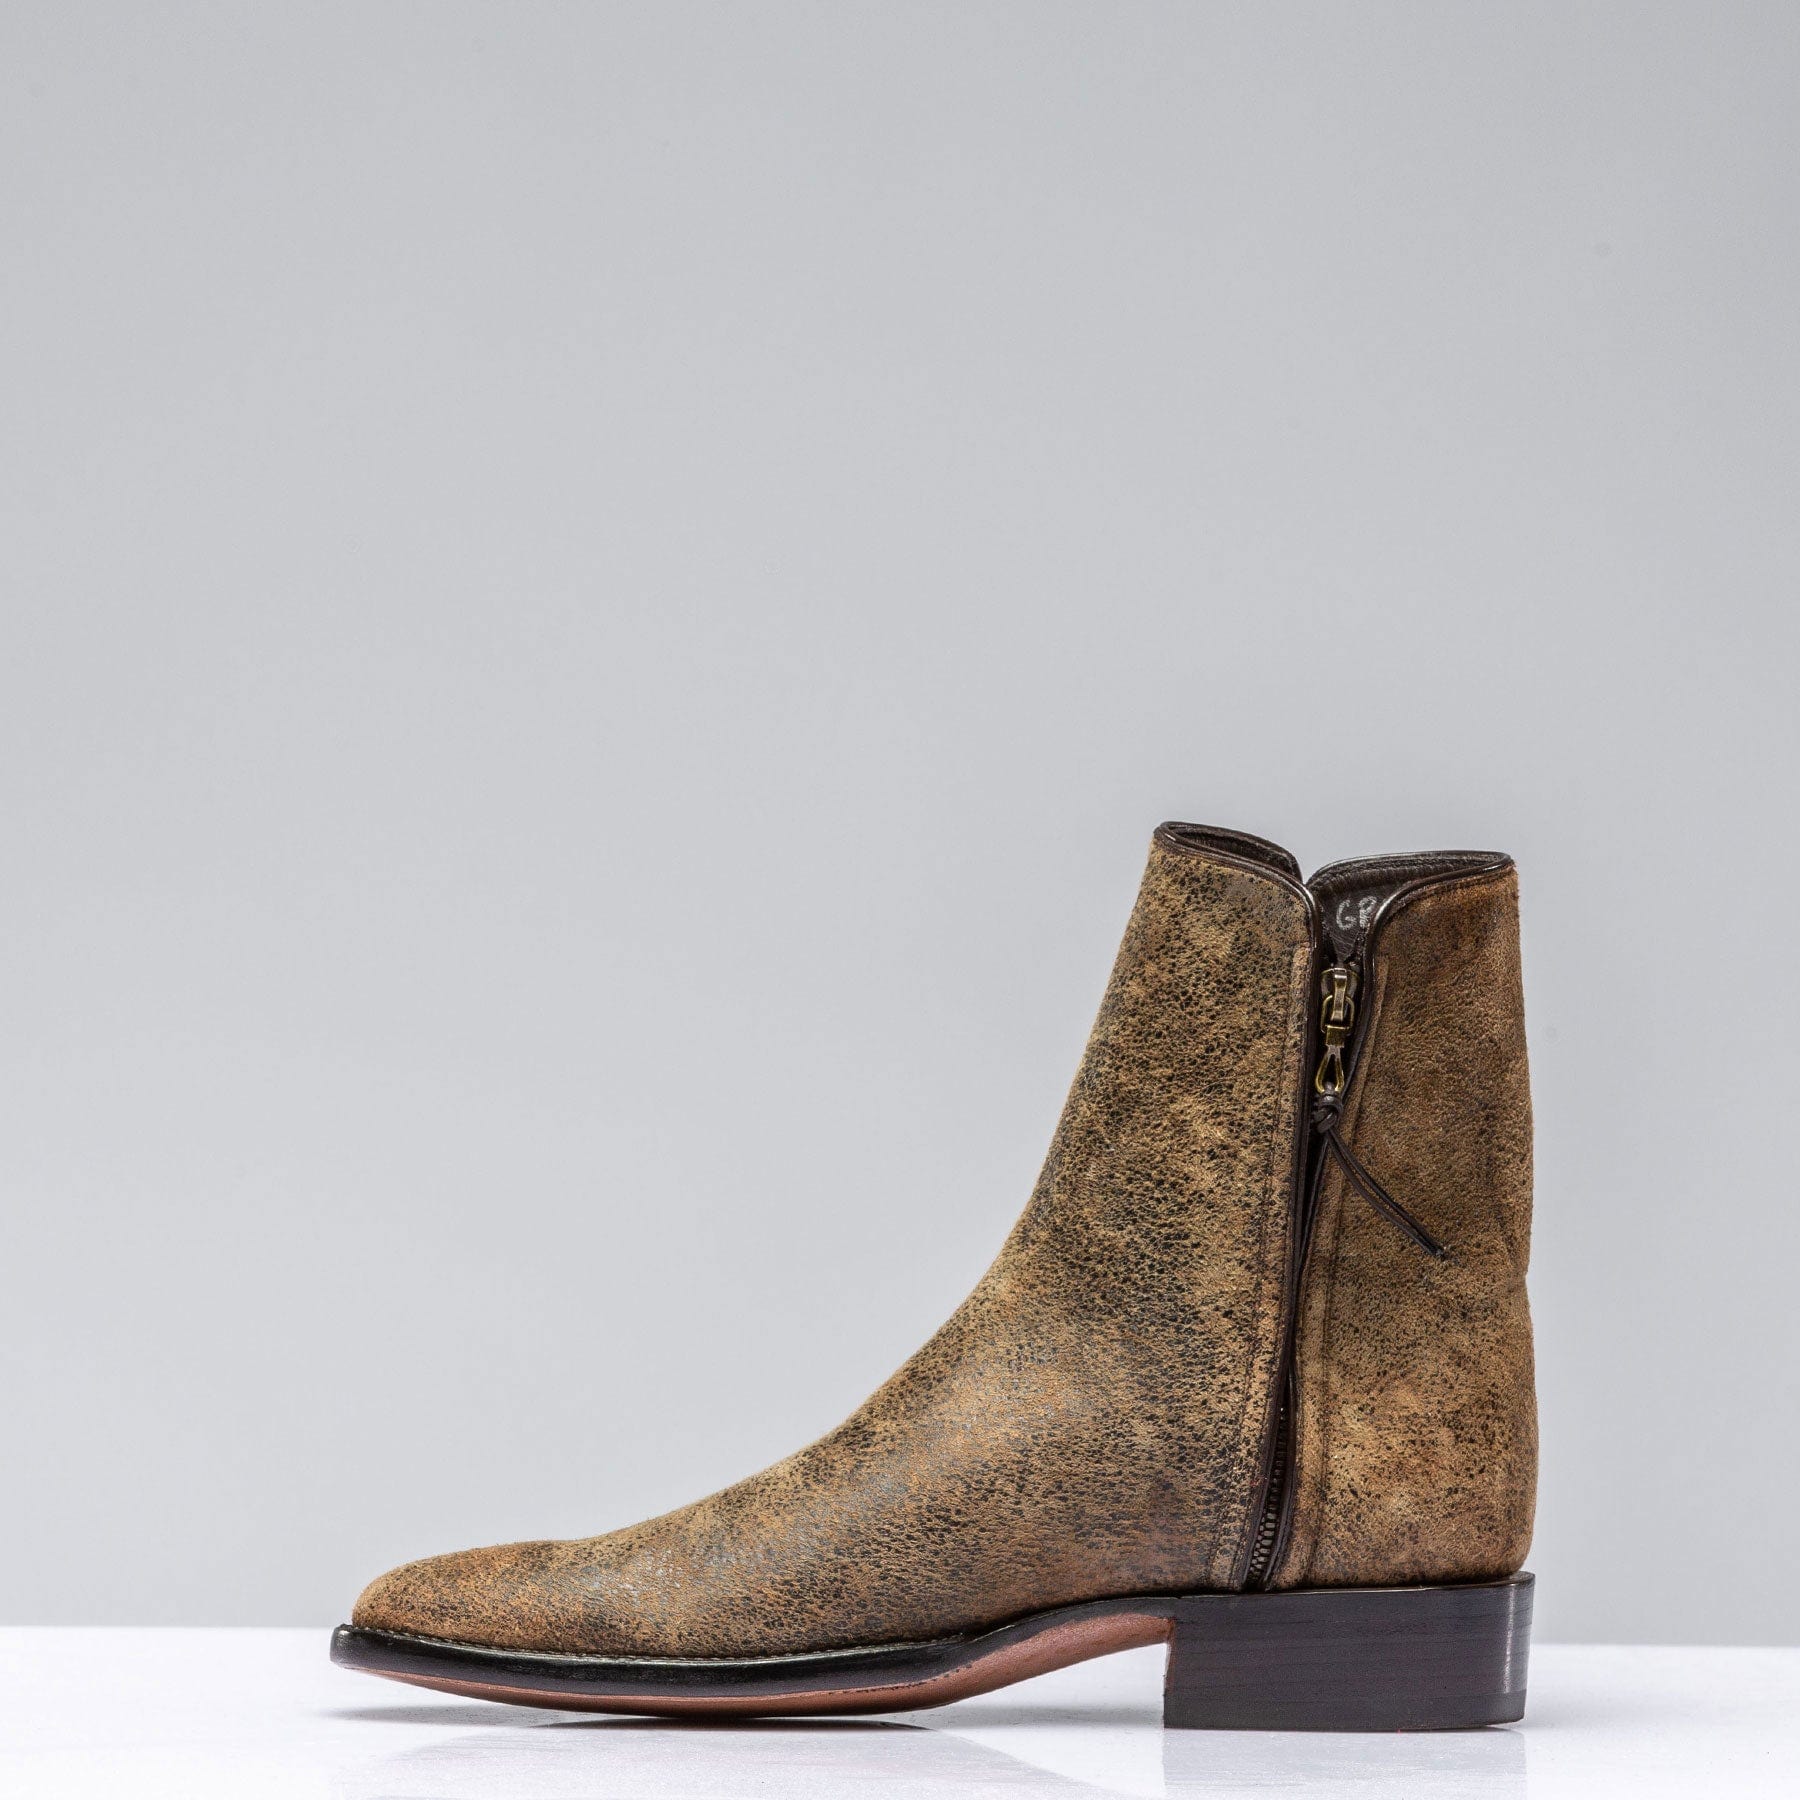 Vintage Goat Suede Chelsea Boot - AXEL'S